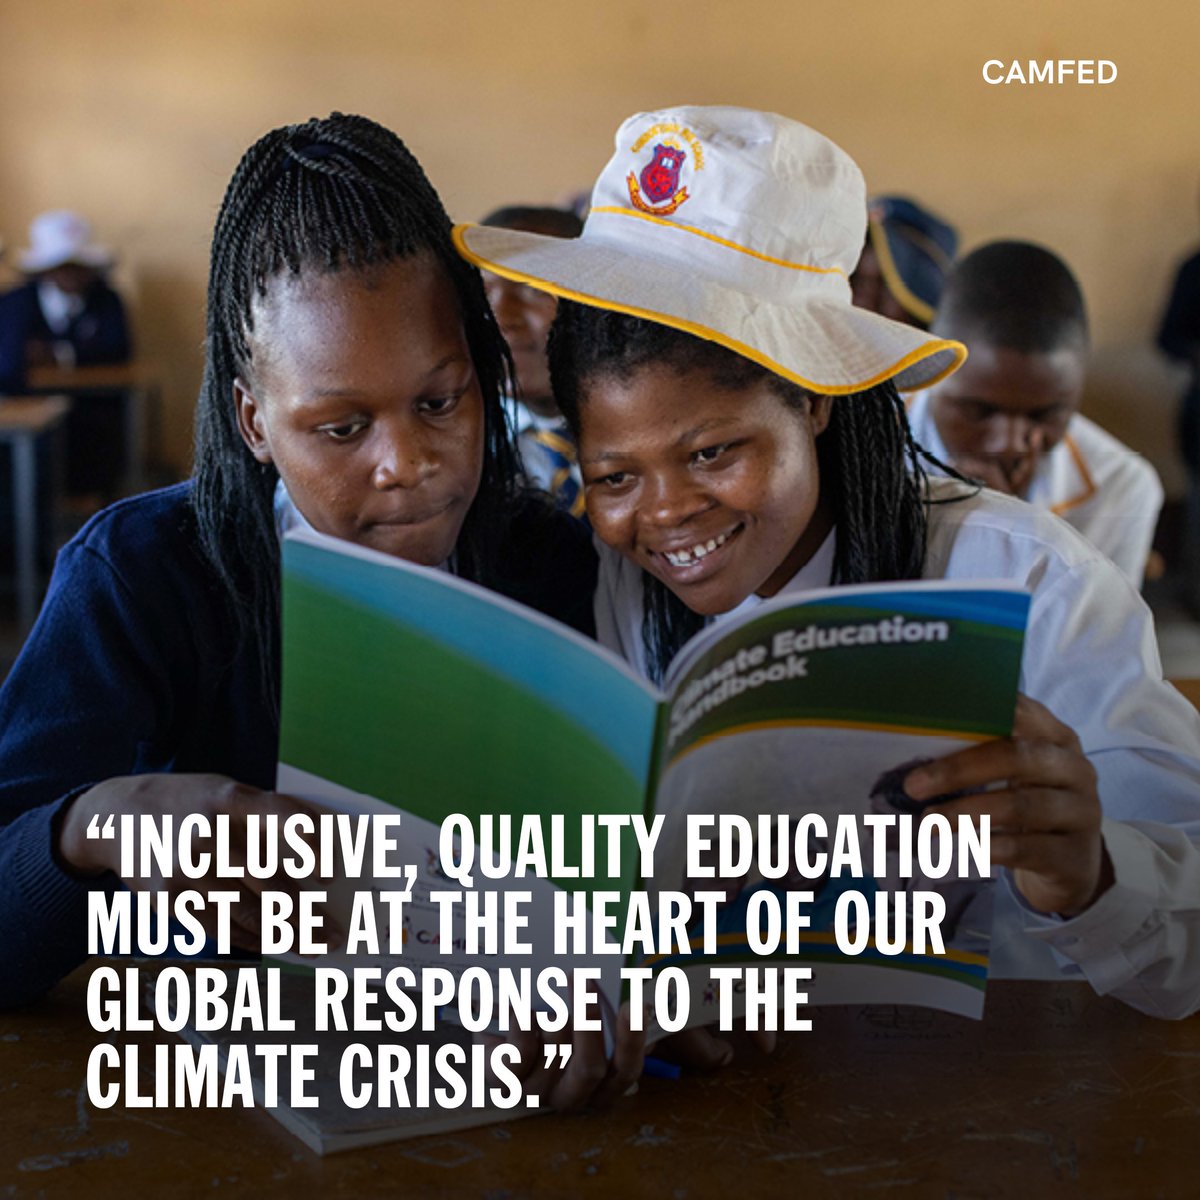 Climate justice starts in the classroom! @Camfed in partnership with Ministries of Education launched a new in-school climate education program led by young women graduates The goal will be to enable young people to build skills needed to thrive in a climate-impacted world 🌎